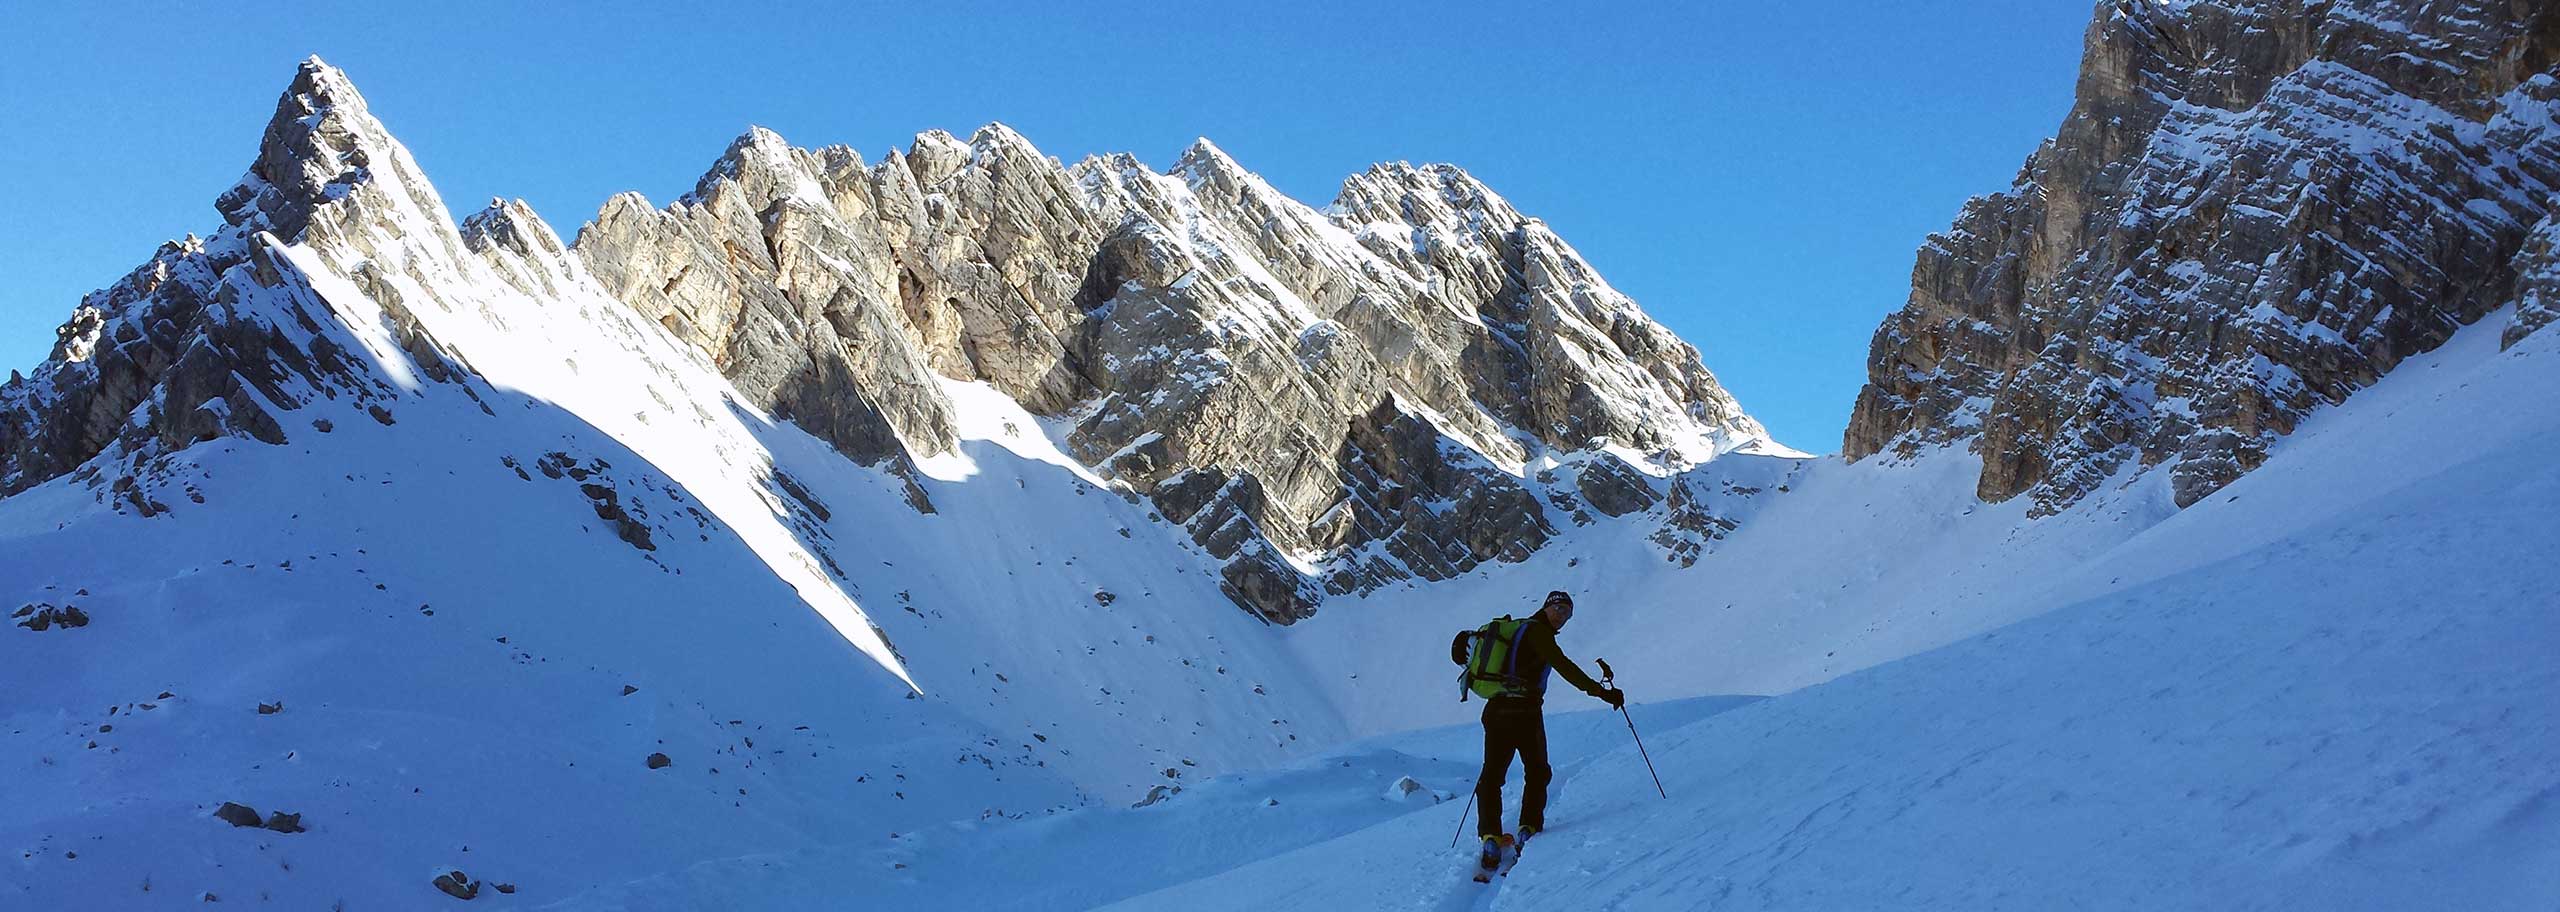 Ski Mountaineering with a Mountain Guide in Val di Zoldo